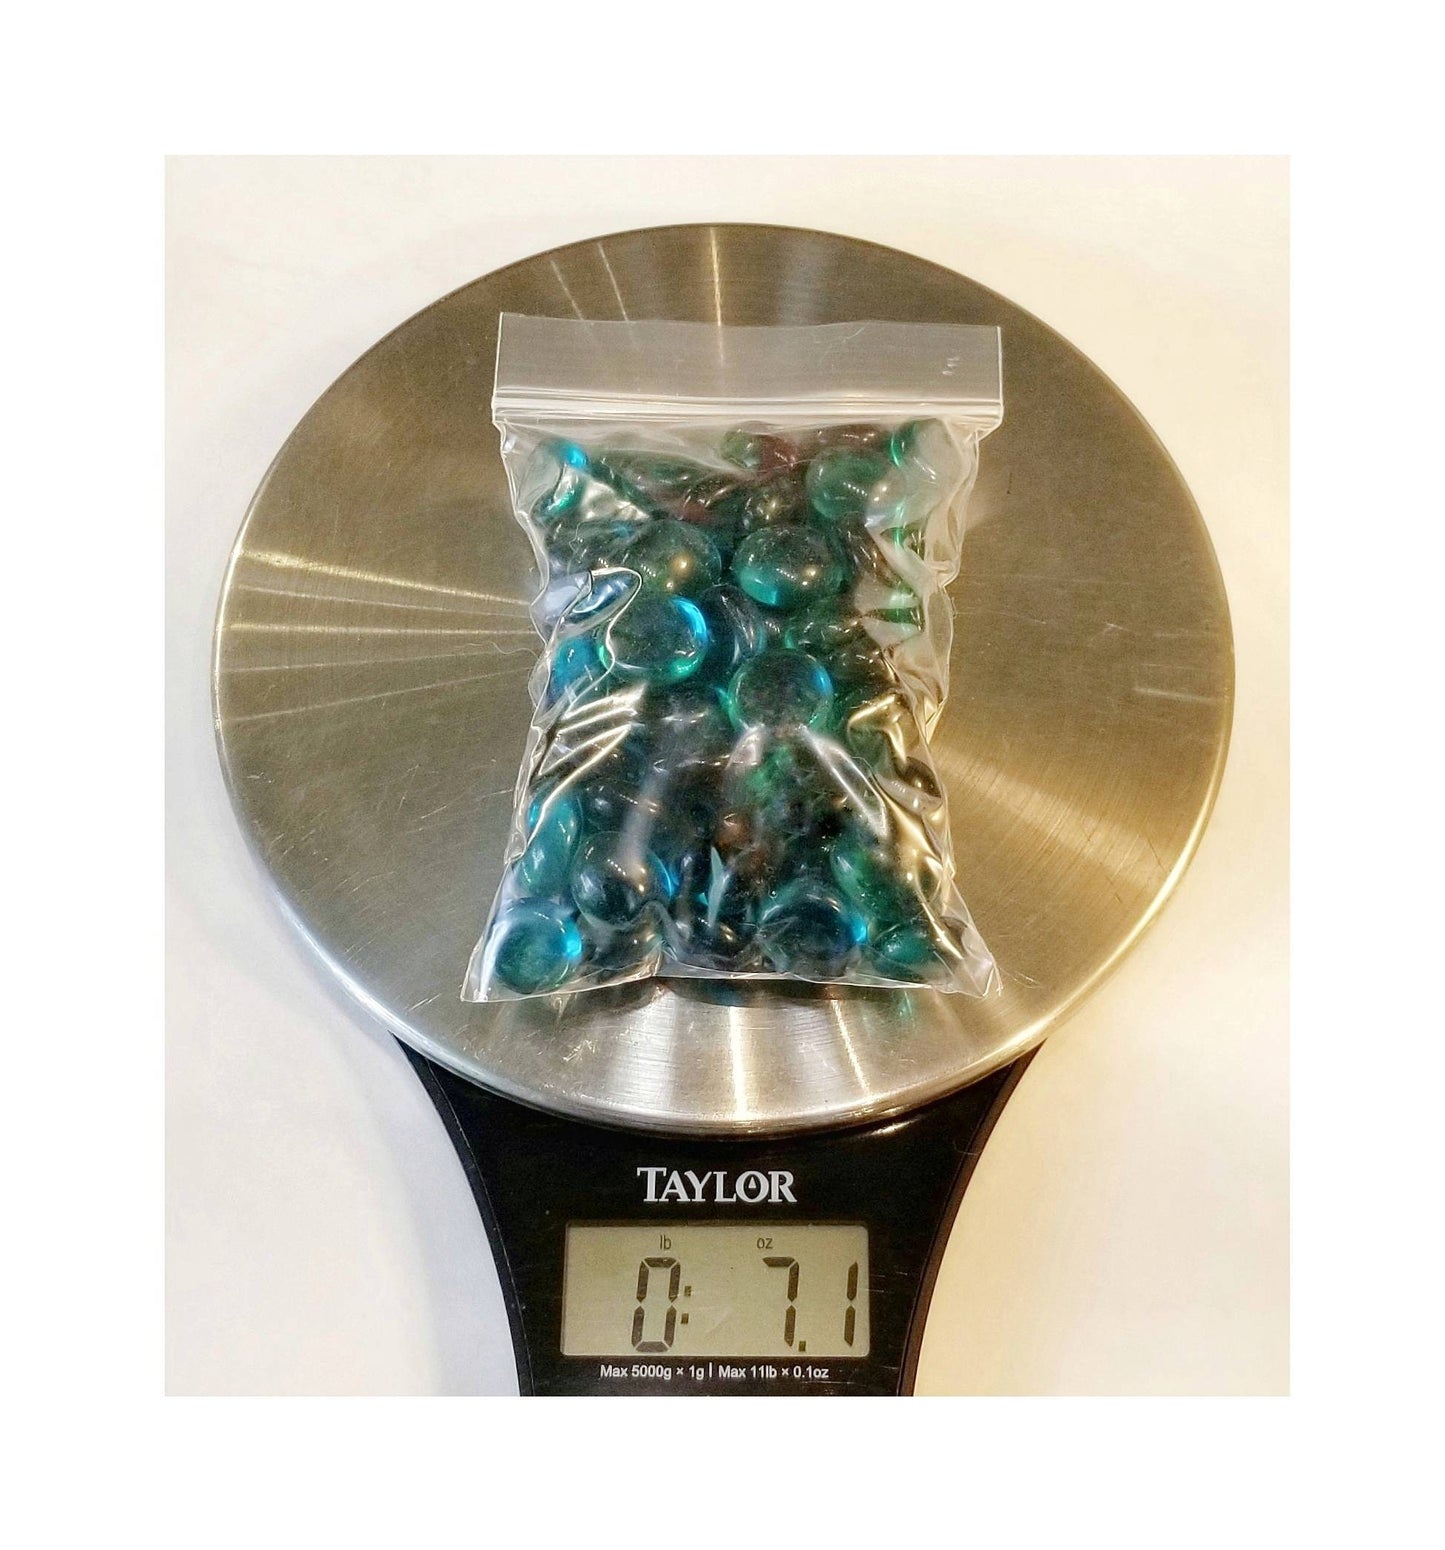 Teal Glass Nuggets for Stained Glass Stepping Stones, Jewelry Making Supply, Craft Projects. Small Gems as pictured. Table Decorations.